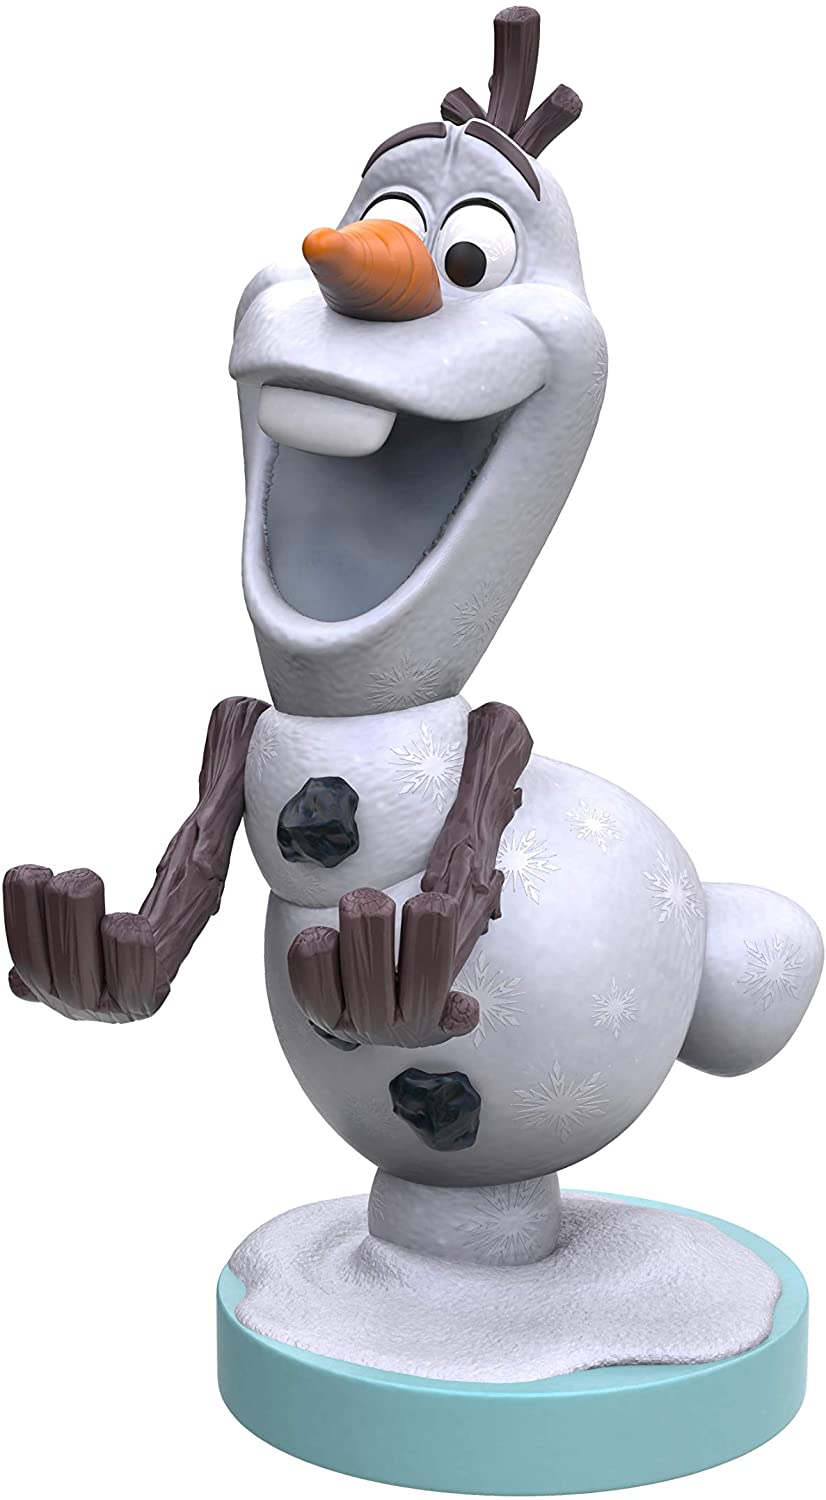 Cable Guy - Disney Frozen "Olaf"